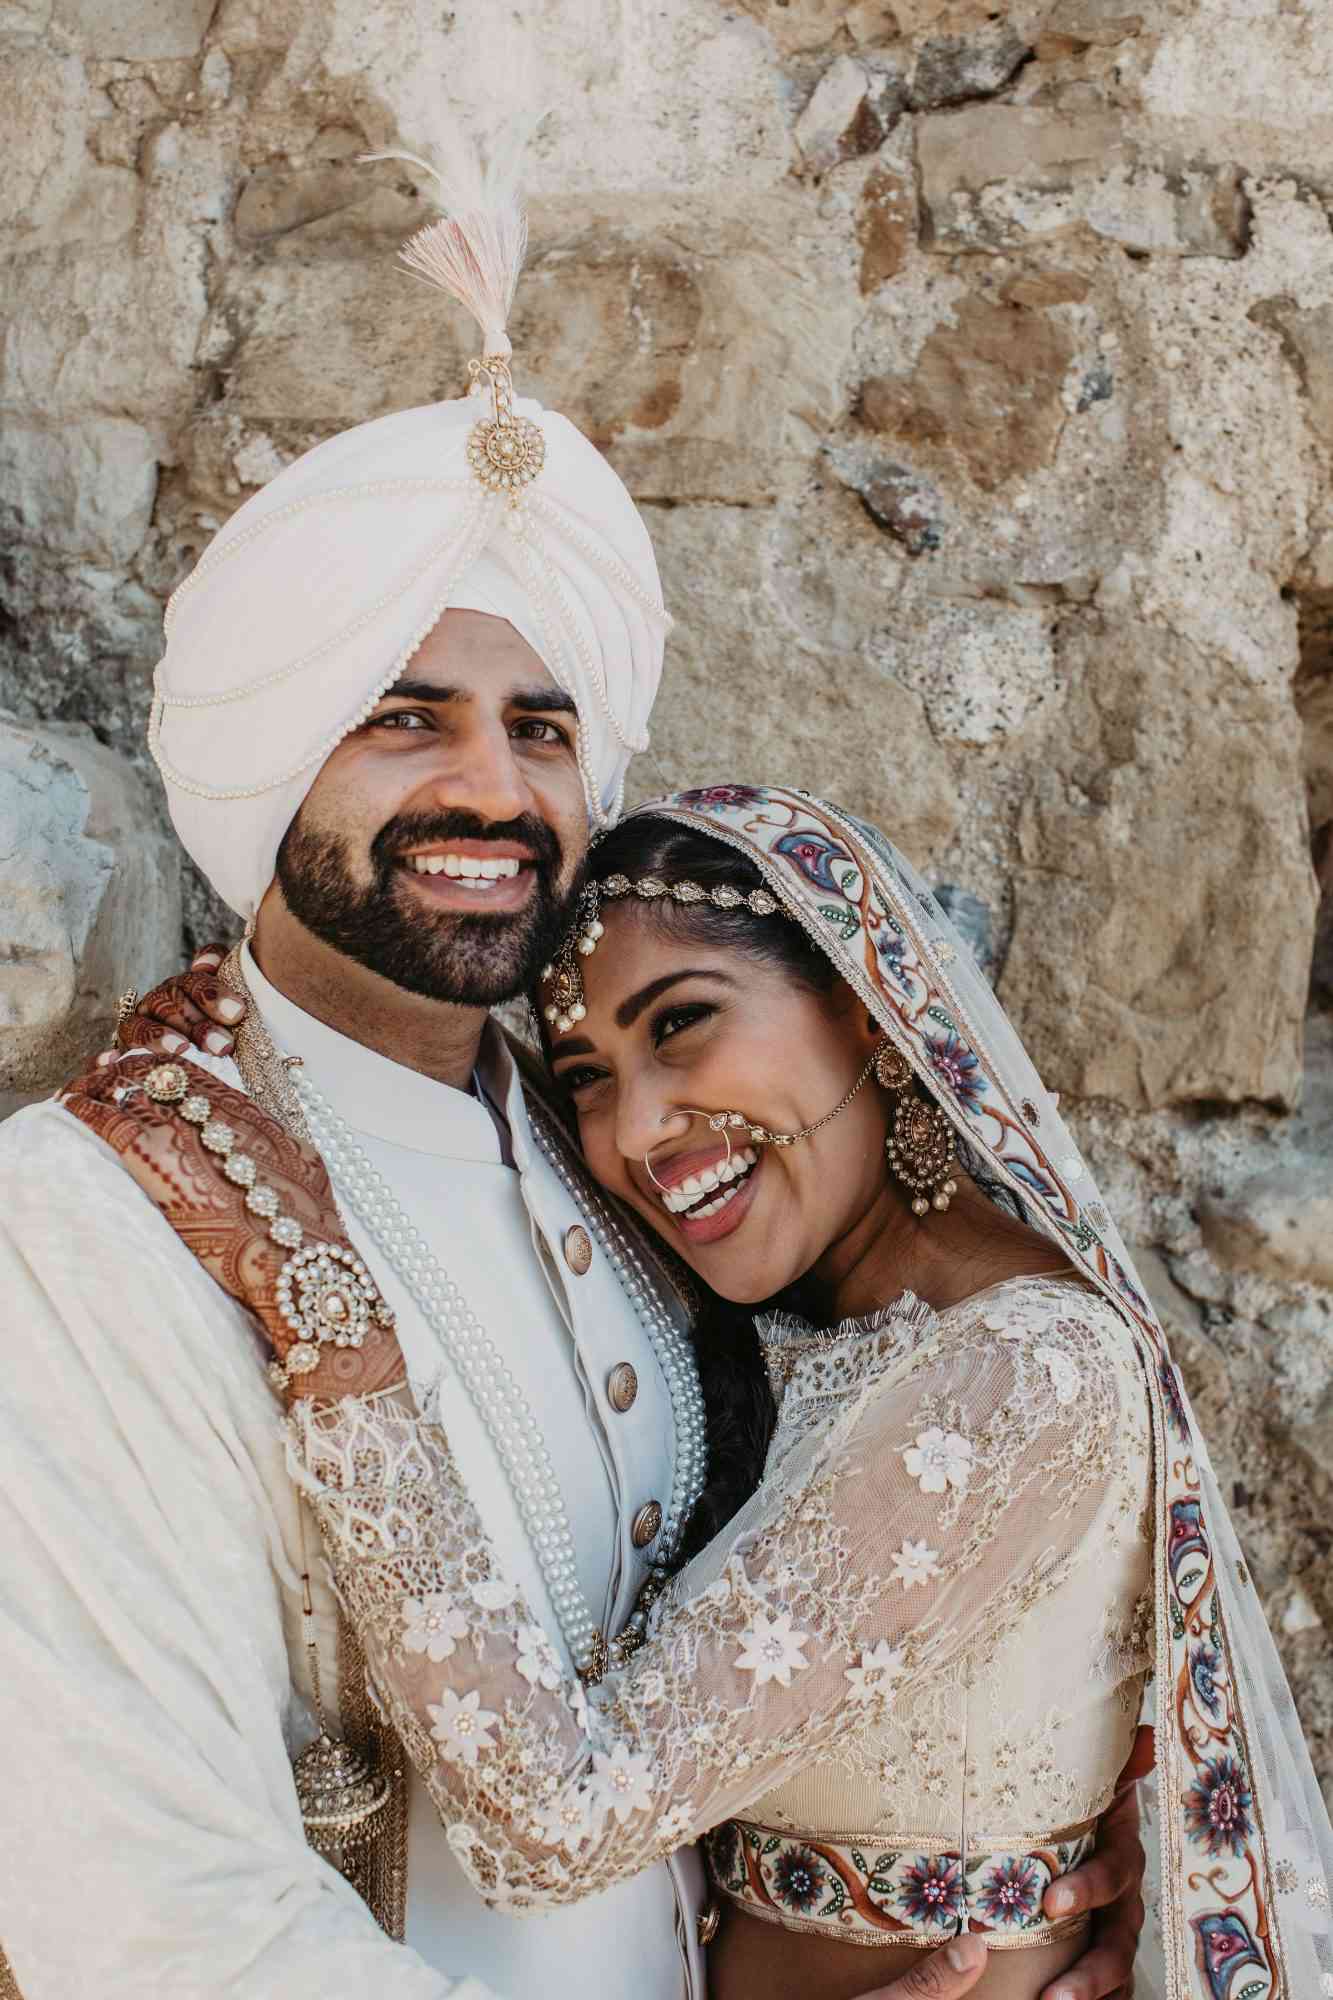 Can a sikh have a love marriage?